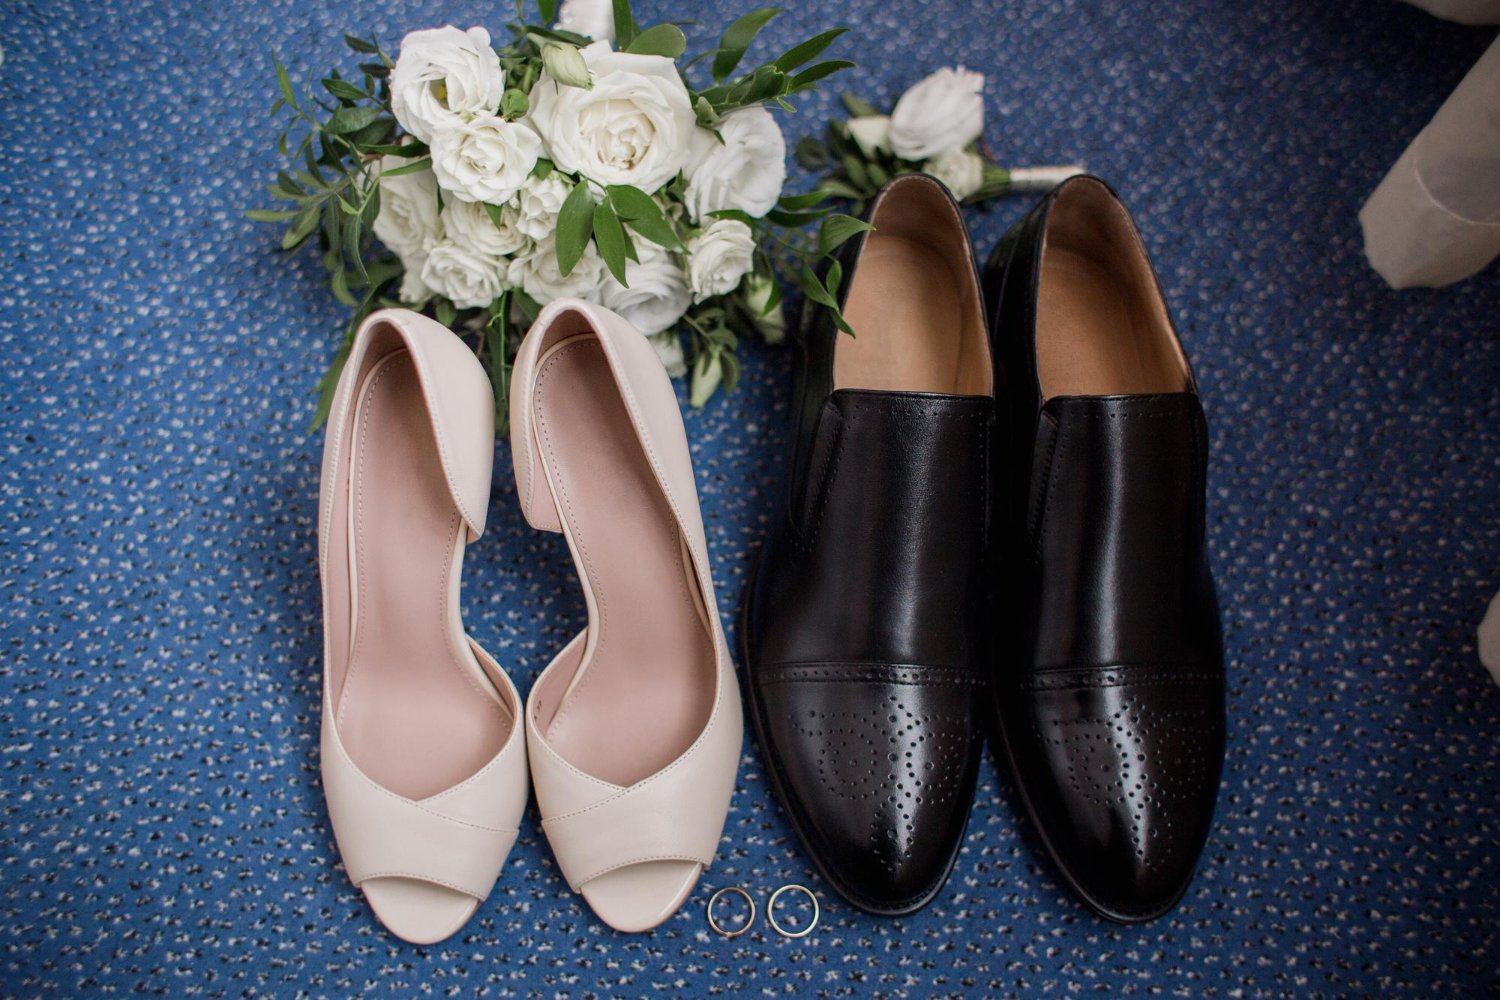 shoes of the bride and groom